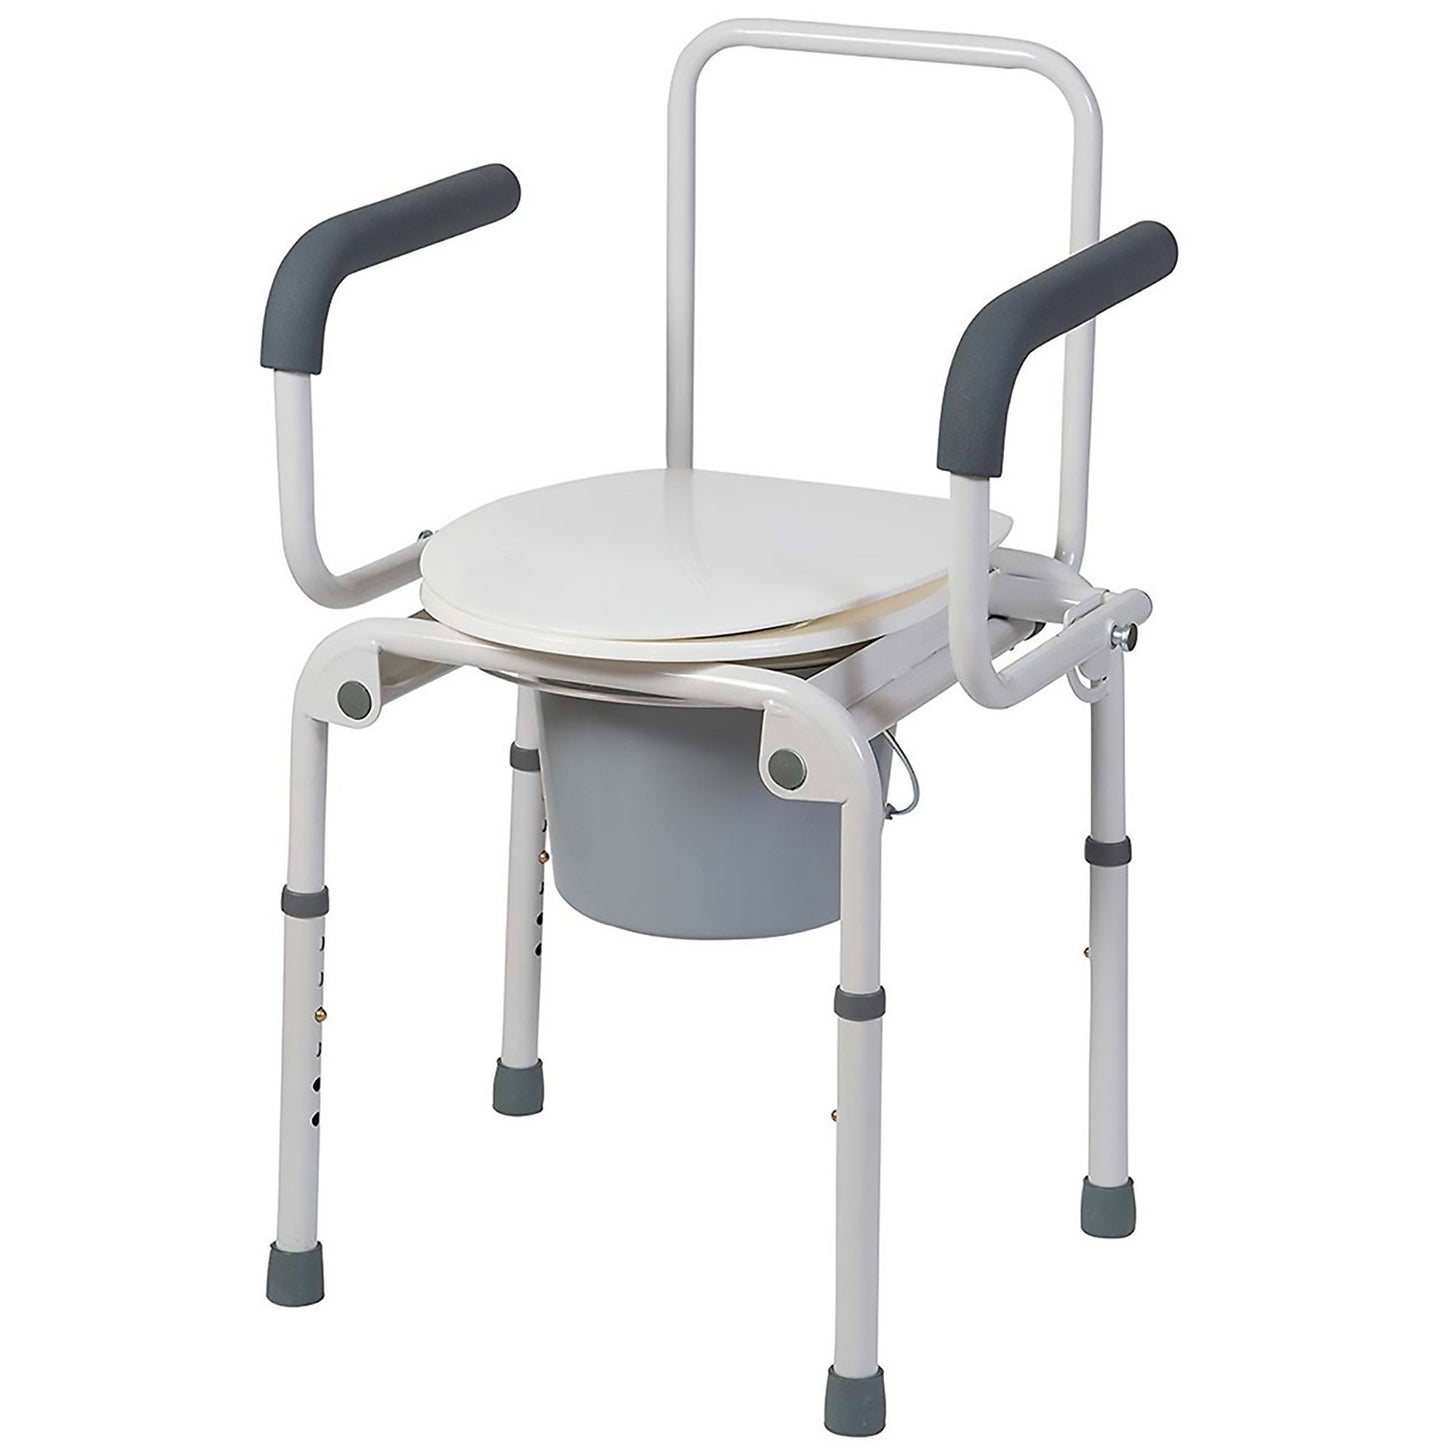 Mabis® Drop-Arm Steel Commode